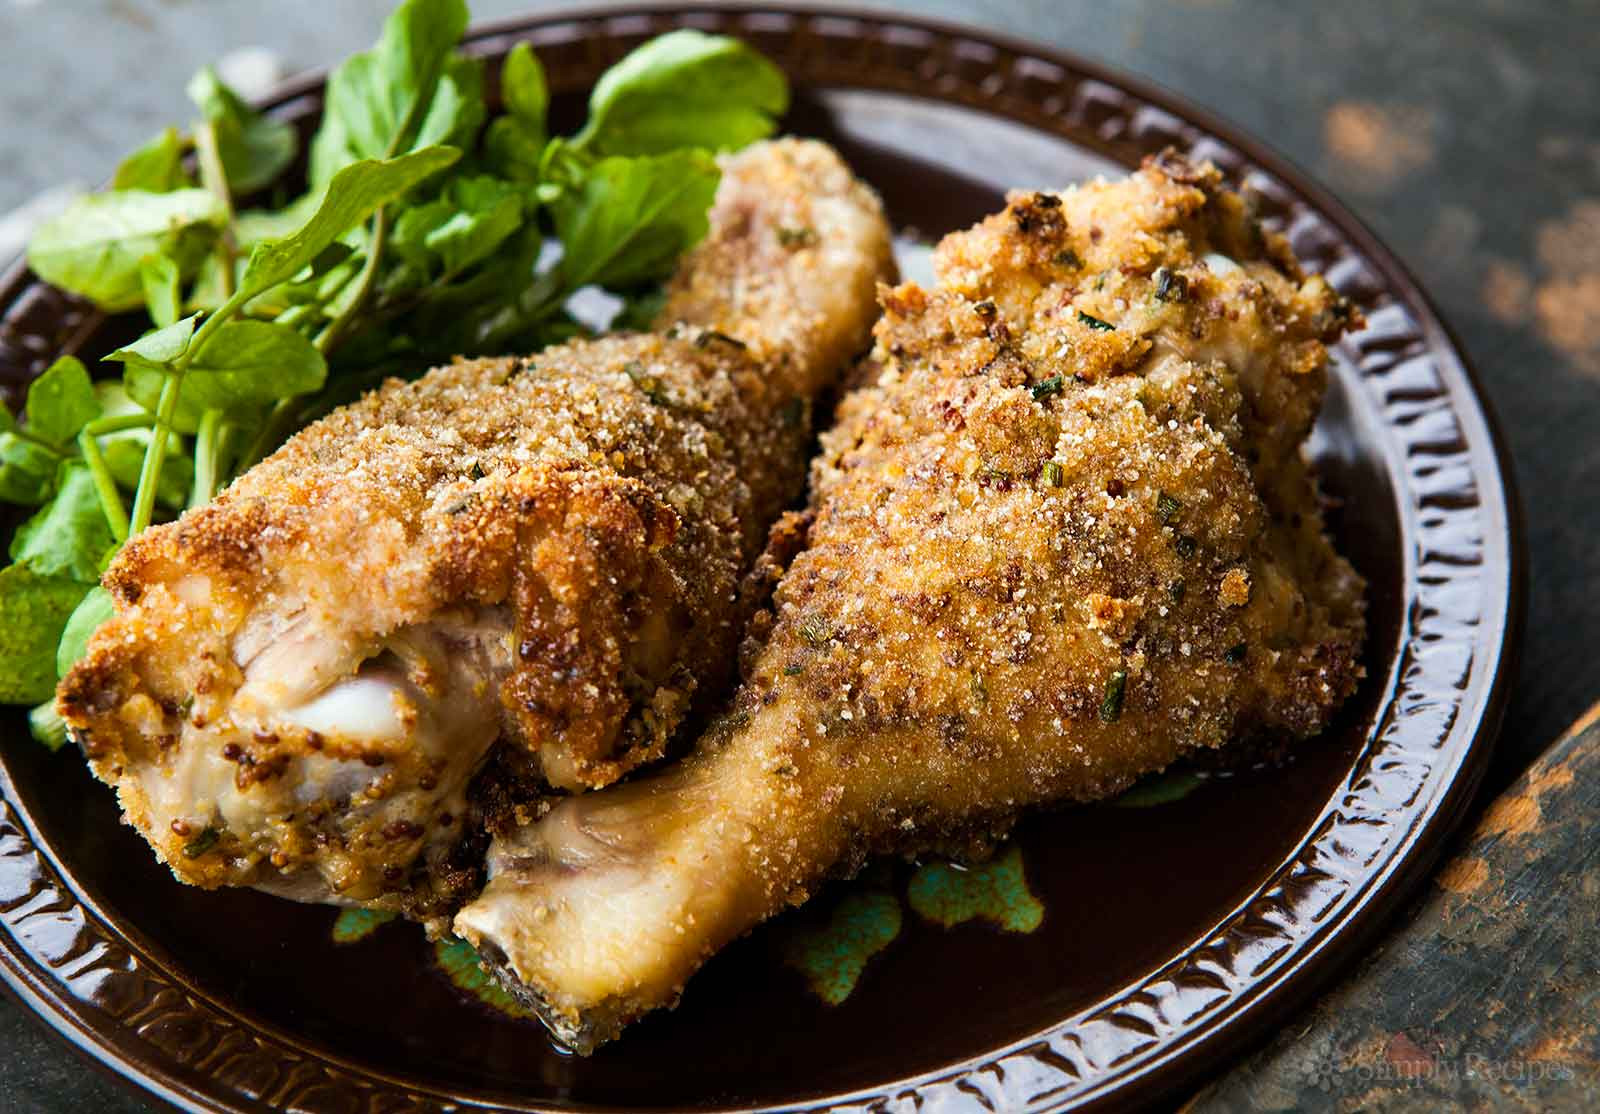 Baked Chicken In Oven
 Breaded and Baked Chicken Drumsticks Recipe